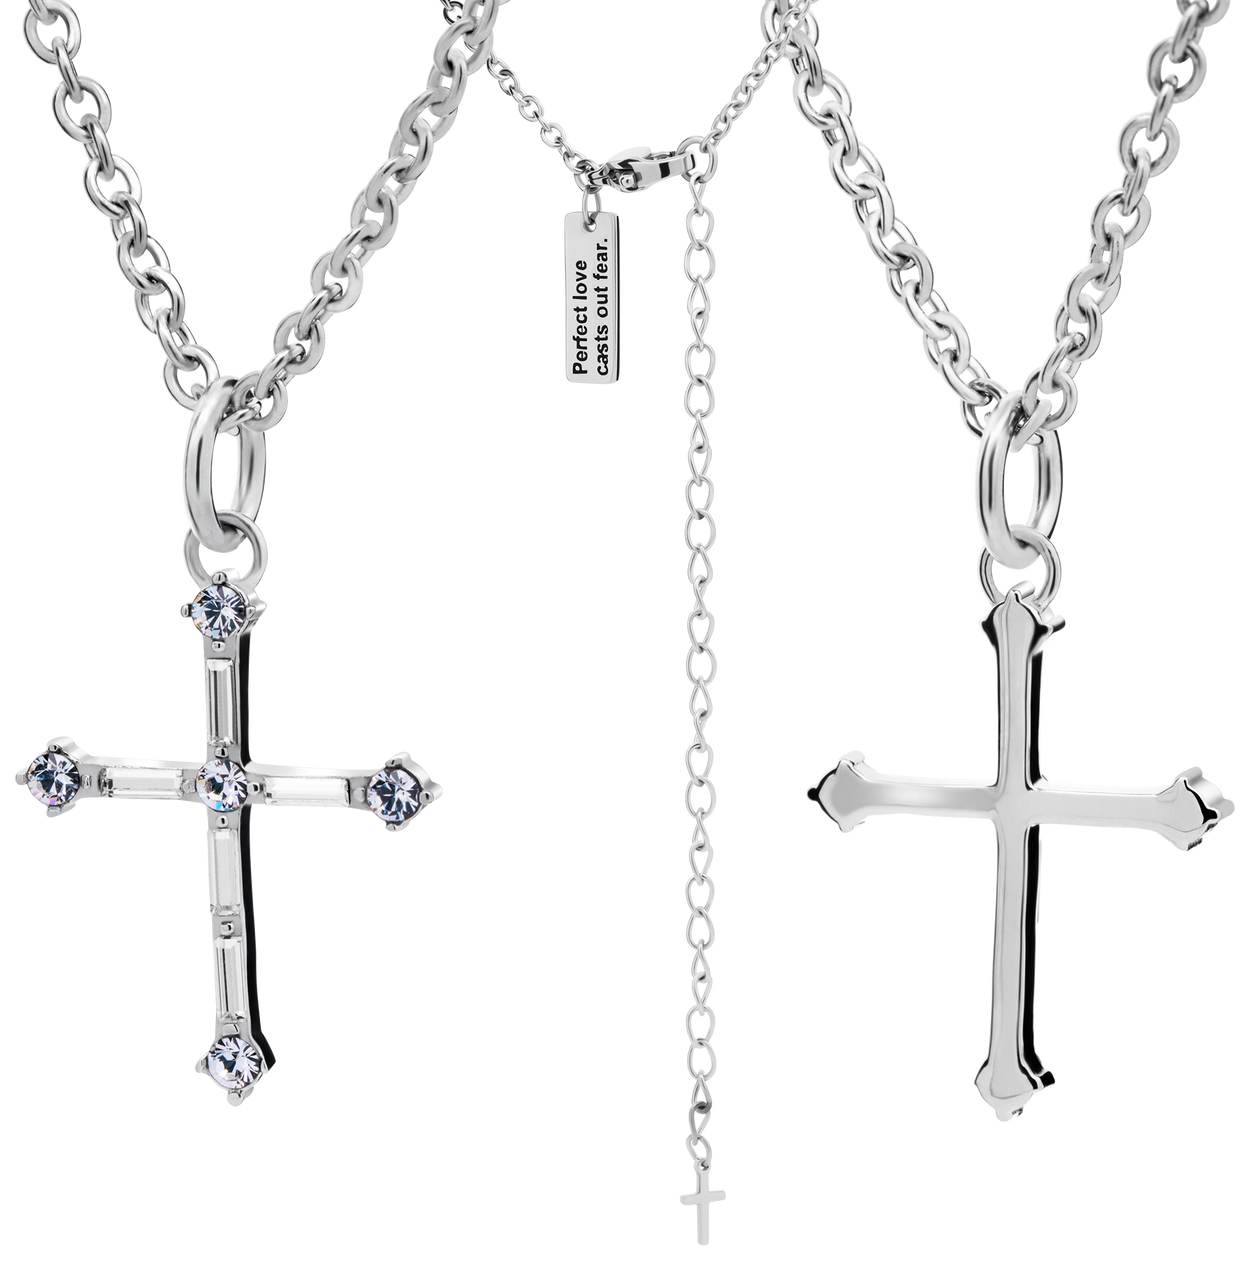 Women's Pefect Love Cross Necklace Stainless Steel with Swarovski Crystals - 1 John 4:18